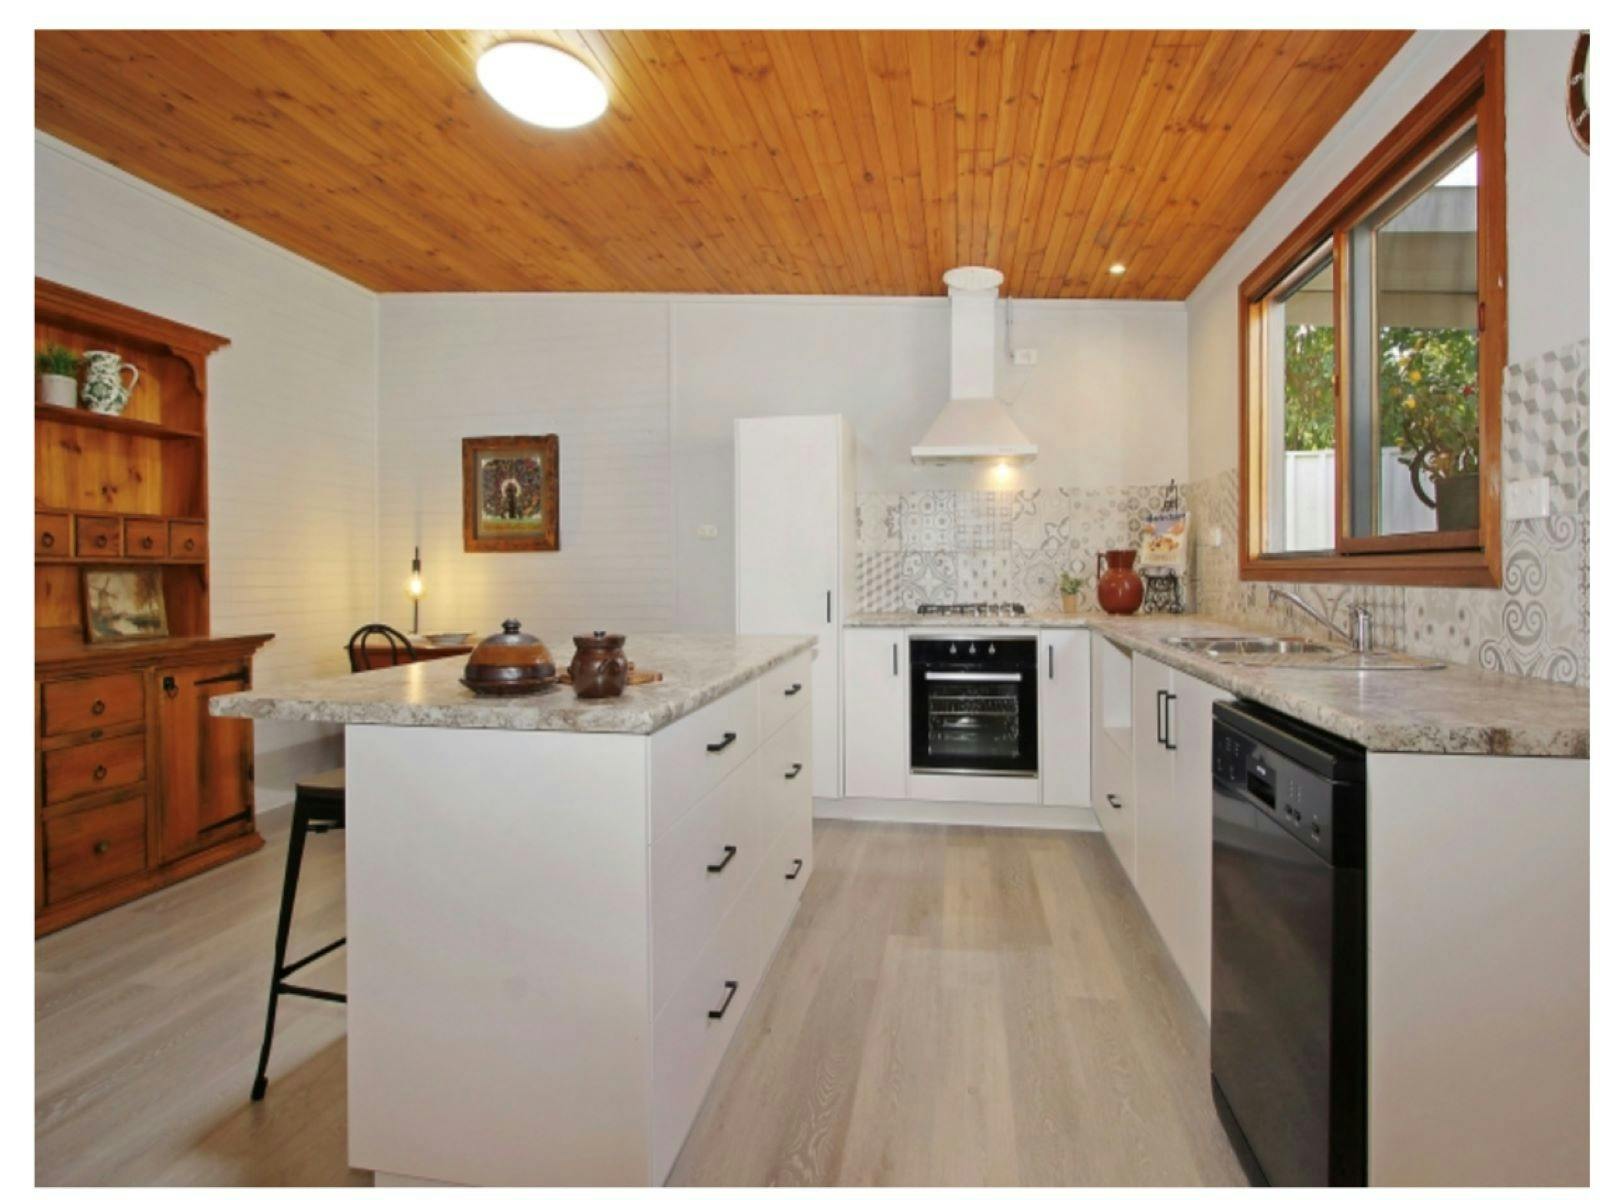 Kitchen, white cupboards with marble tops. Breakfast bench in the middle, black dishwasher and oven.